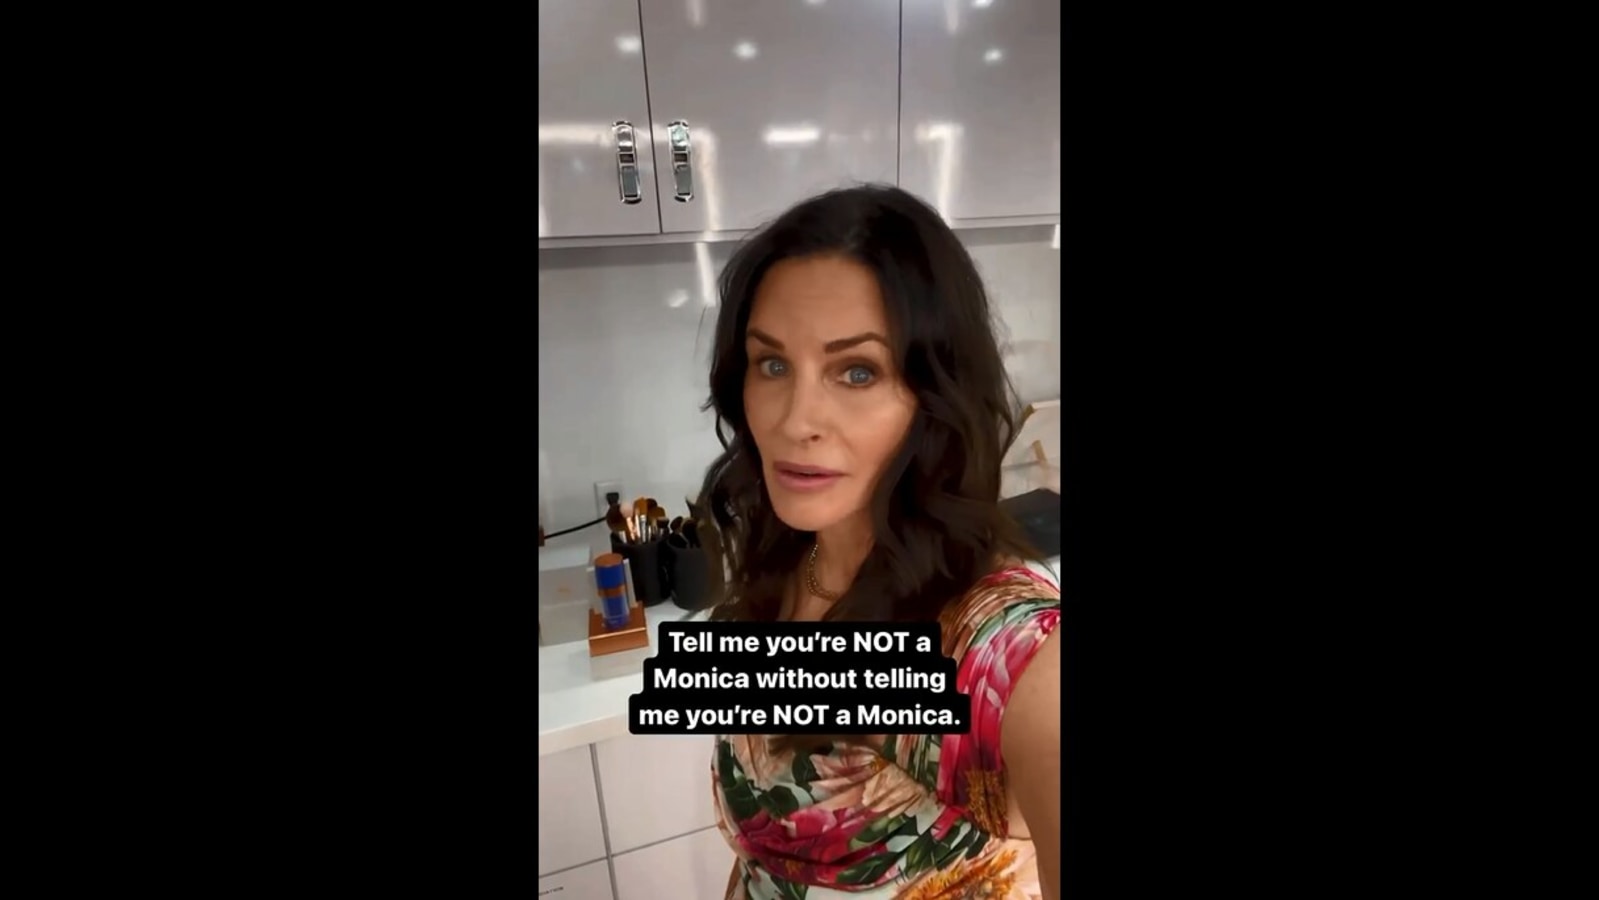 Courteney Coxs Video Involving Her Character Monica From Friends Goes Viral Trending 